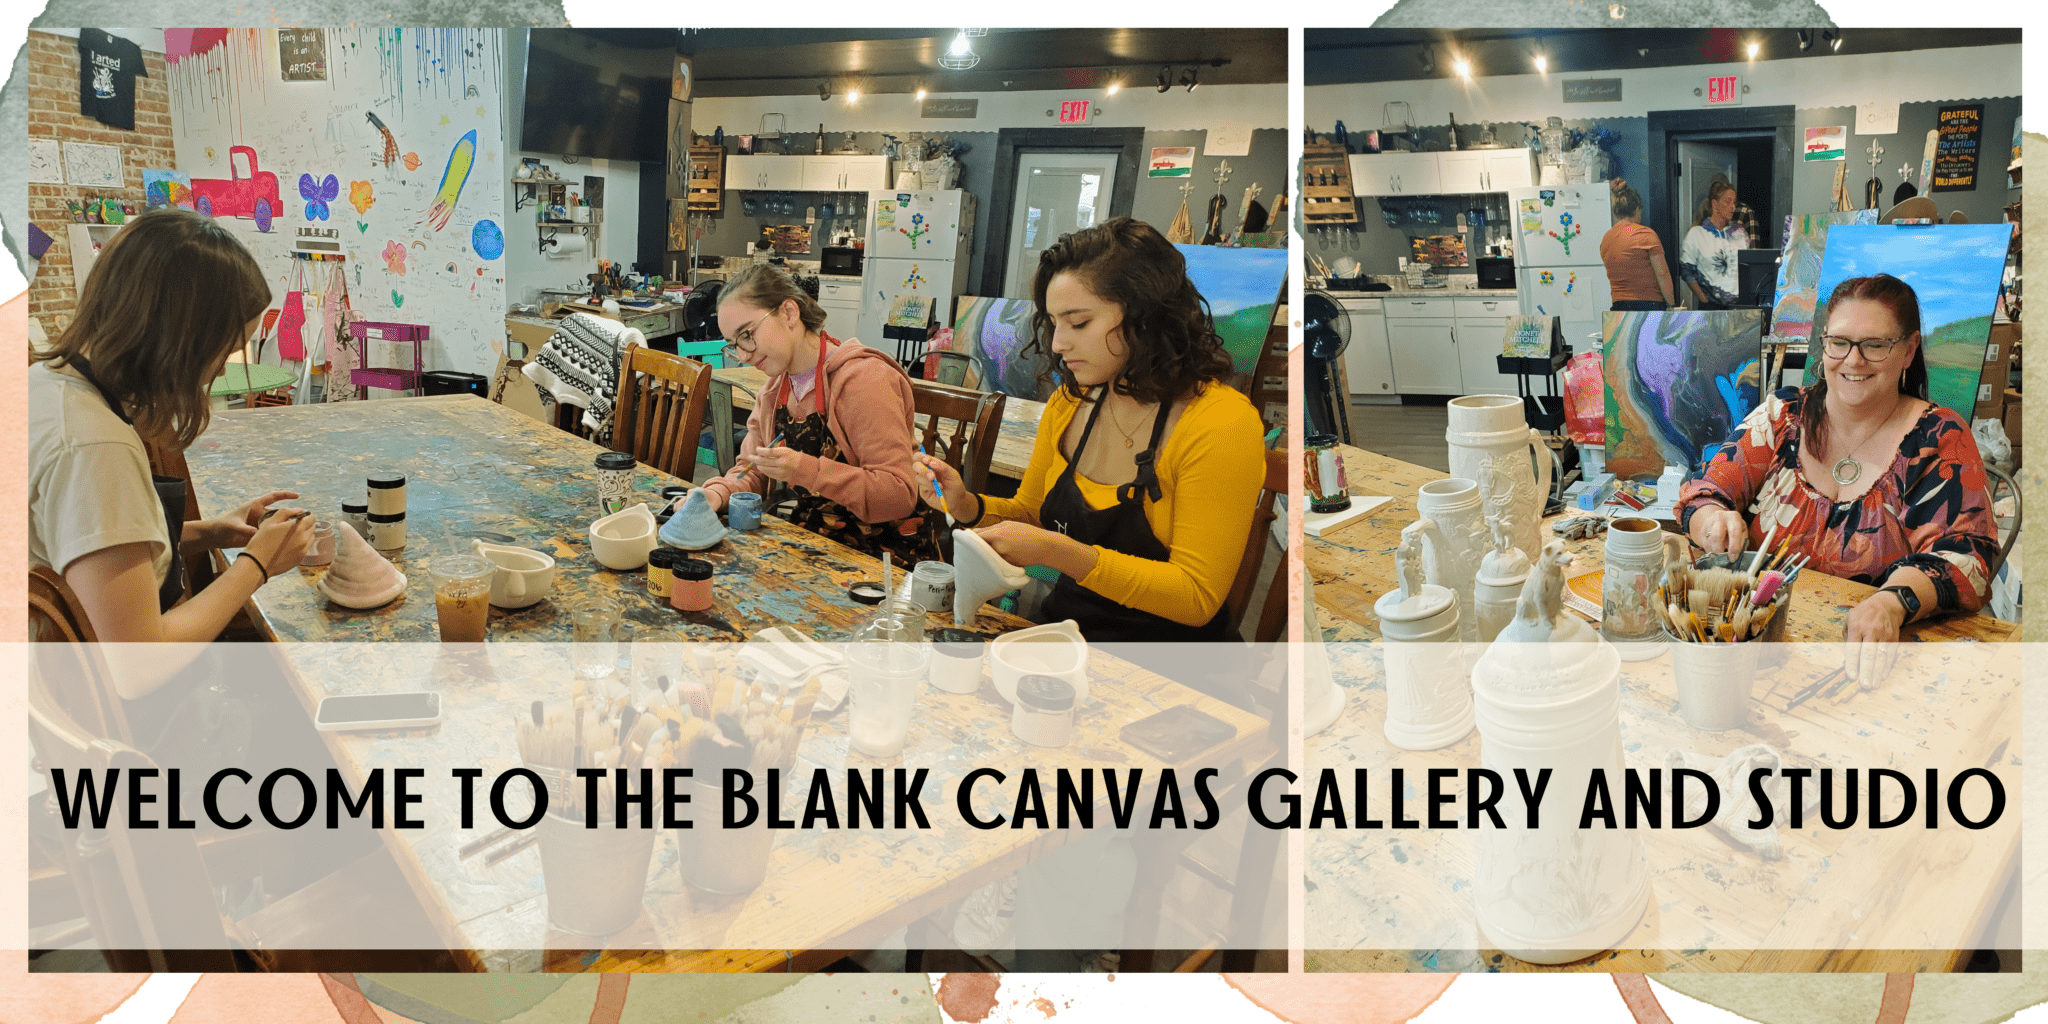 Blank canvas fine art studio and gallery with women working on ceramics